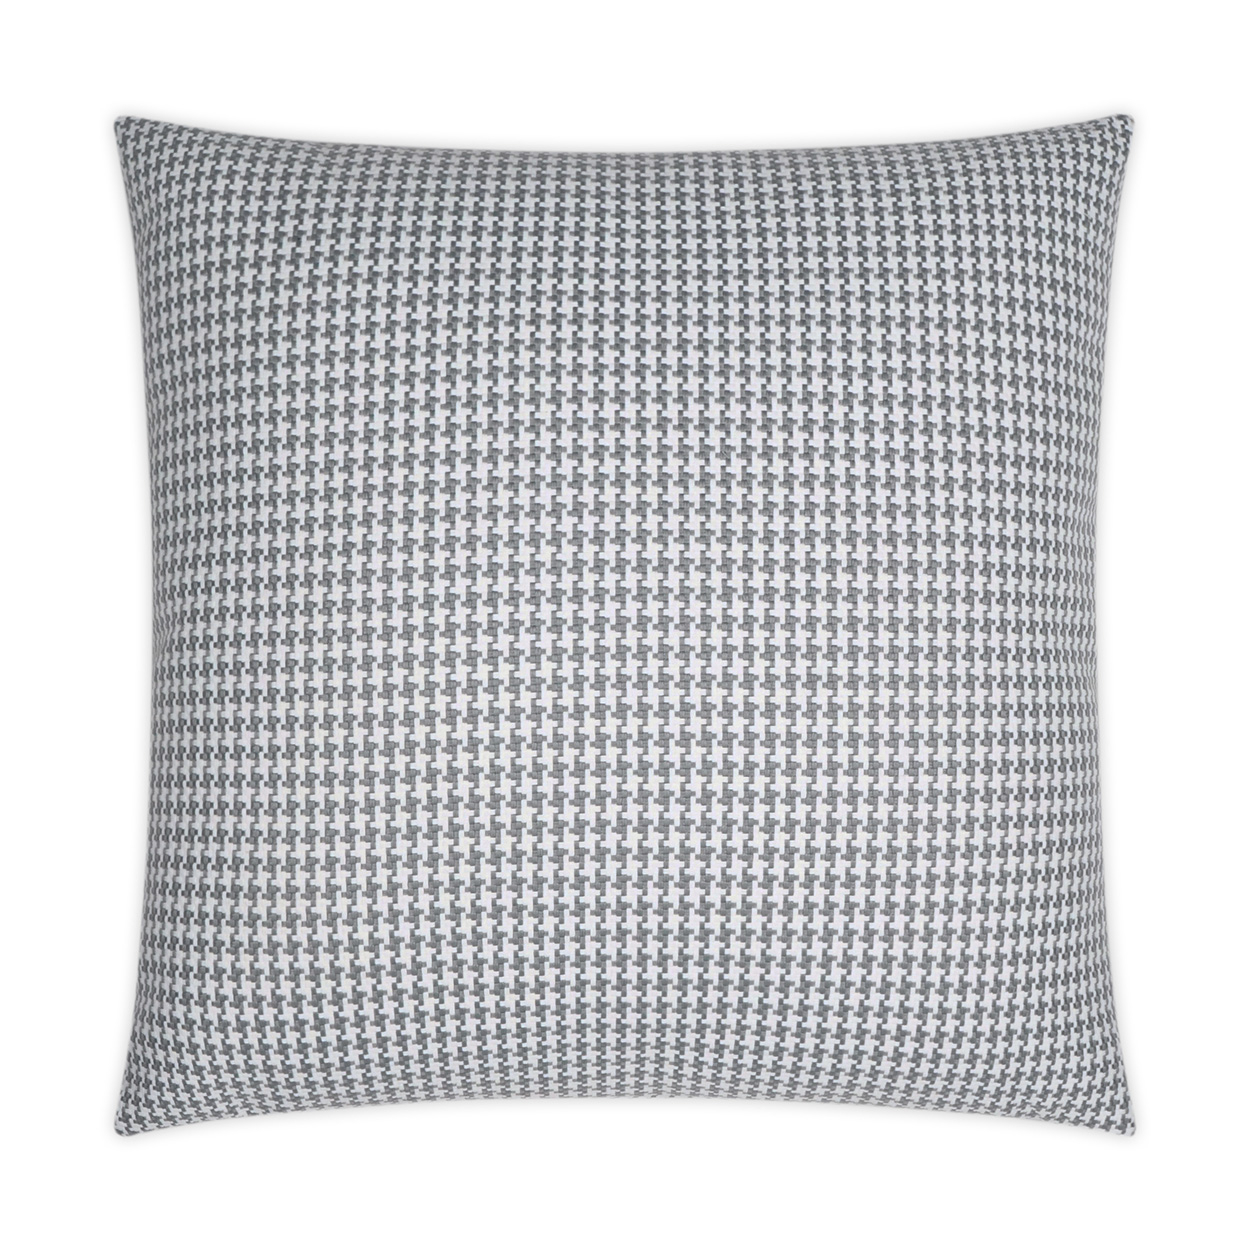 Bedford Stone Outdoor Pillow 22x22